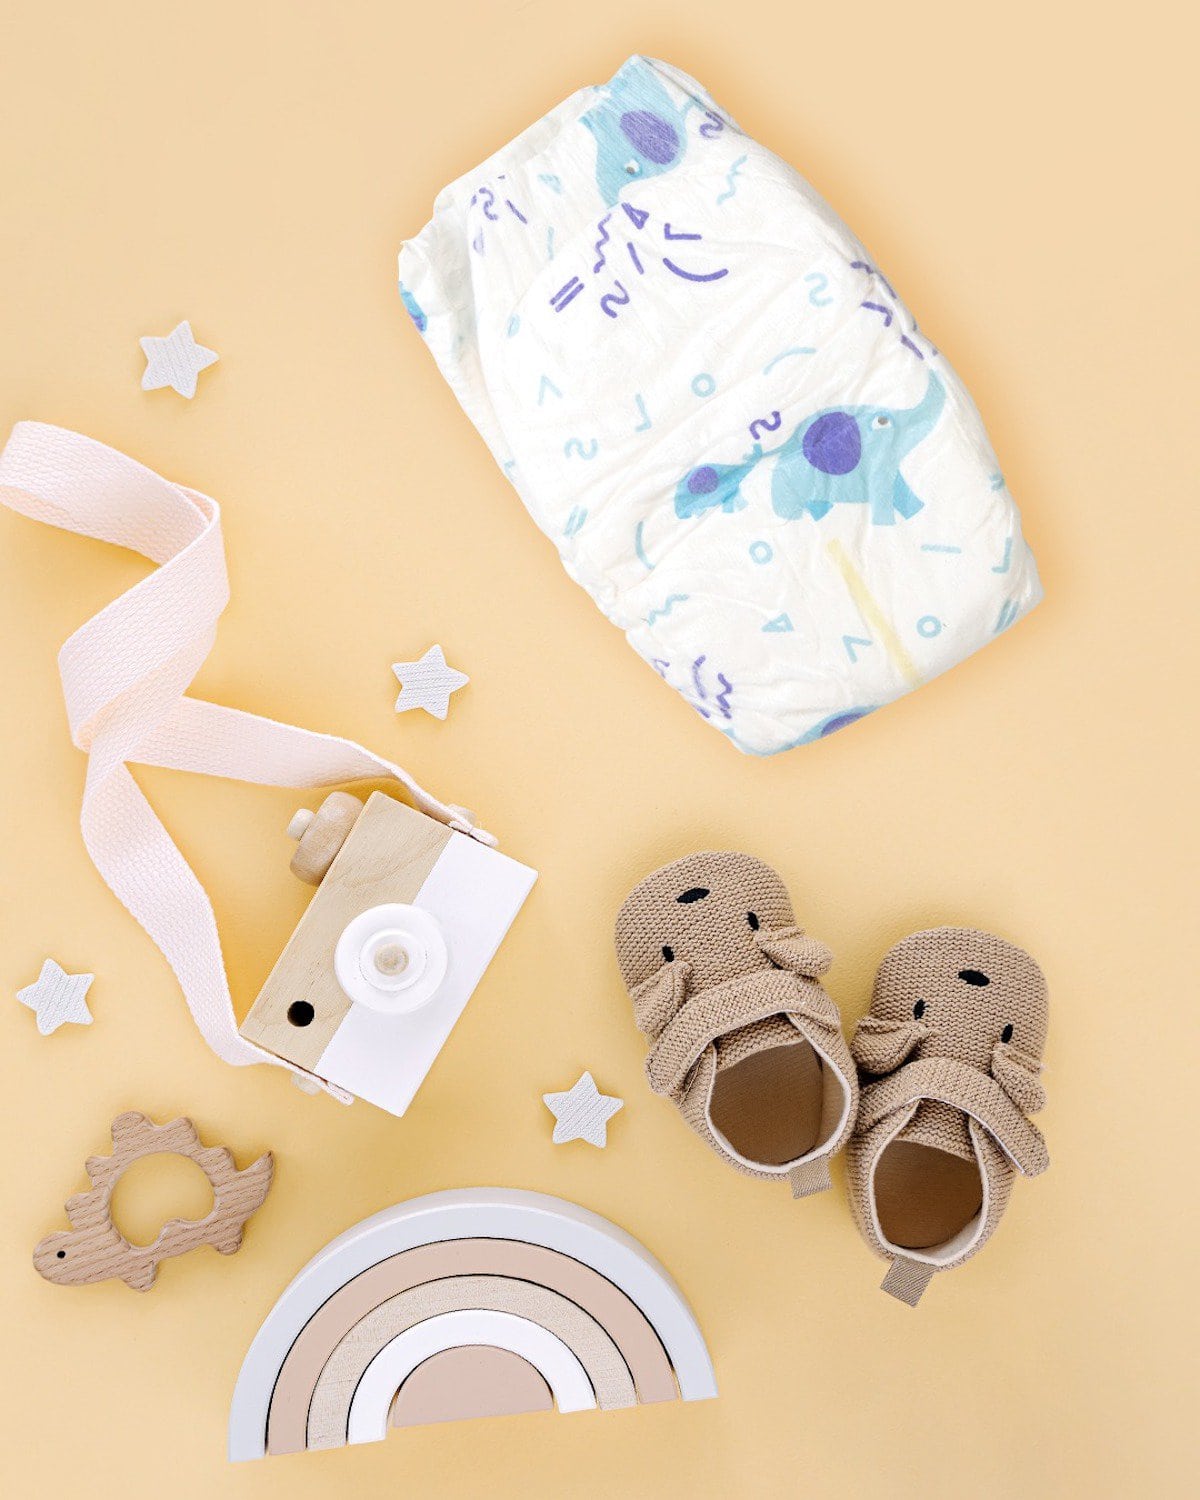 Newborn Baby Essentials Checklist: Make Your Baby Checklist With The Things You Need Once Baby Arrives 19 Daily Mom, Magazine For Families